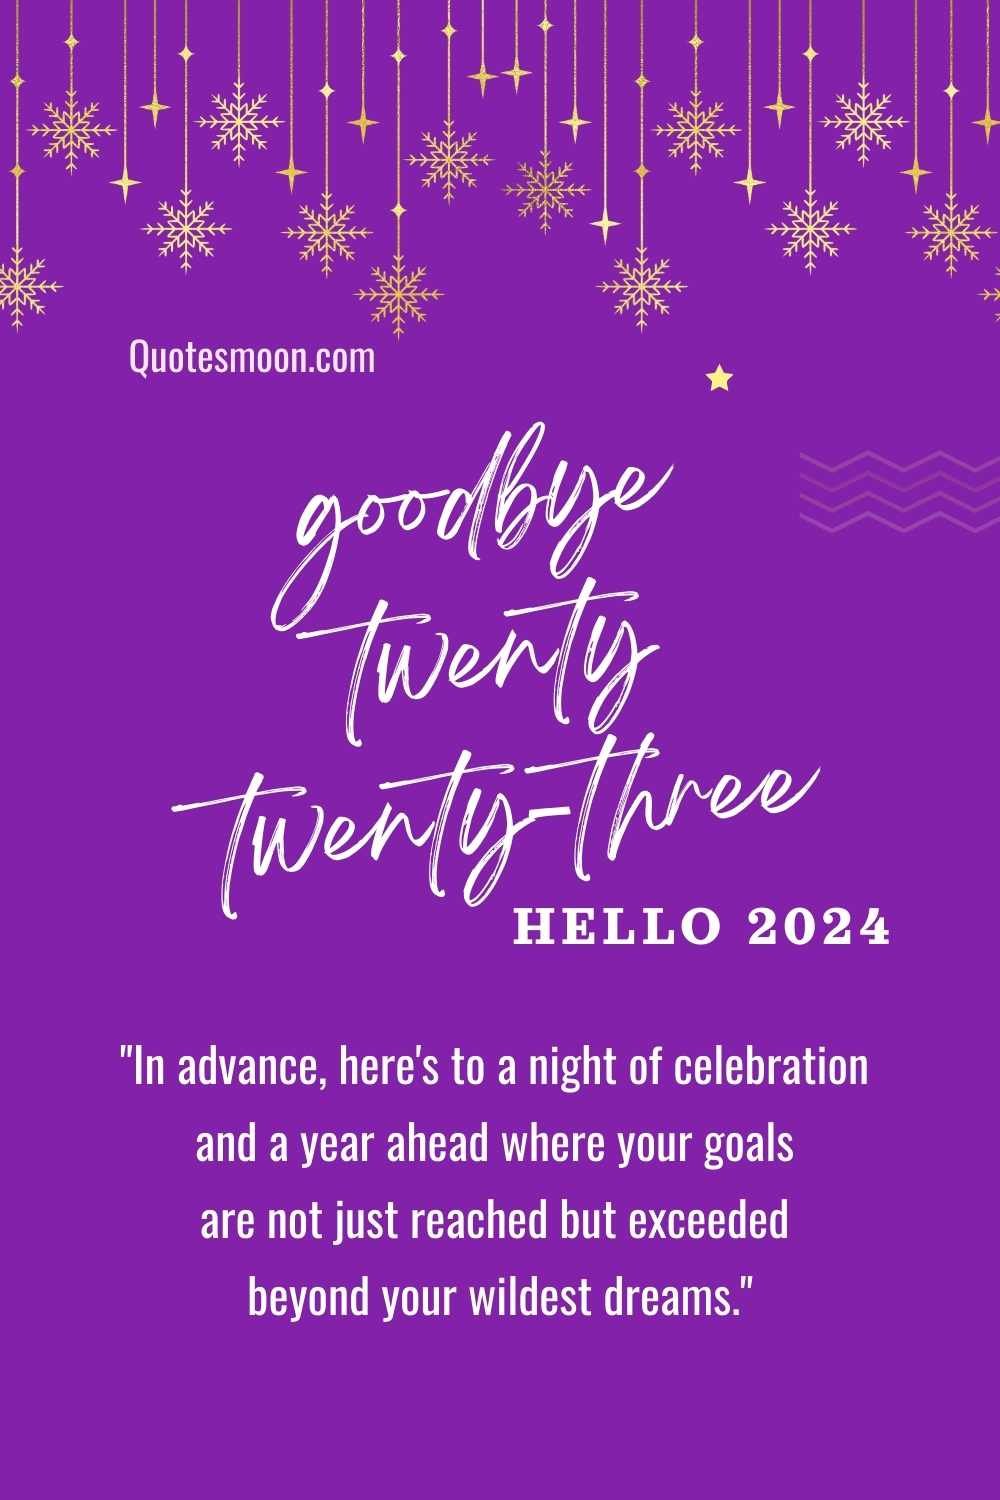 124 Best Happy New Year 2024 Quotes for Spreading Joy and Hope for a